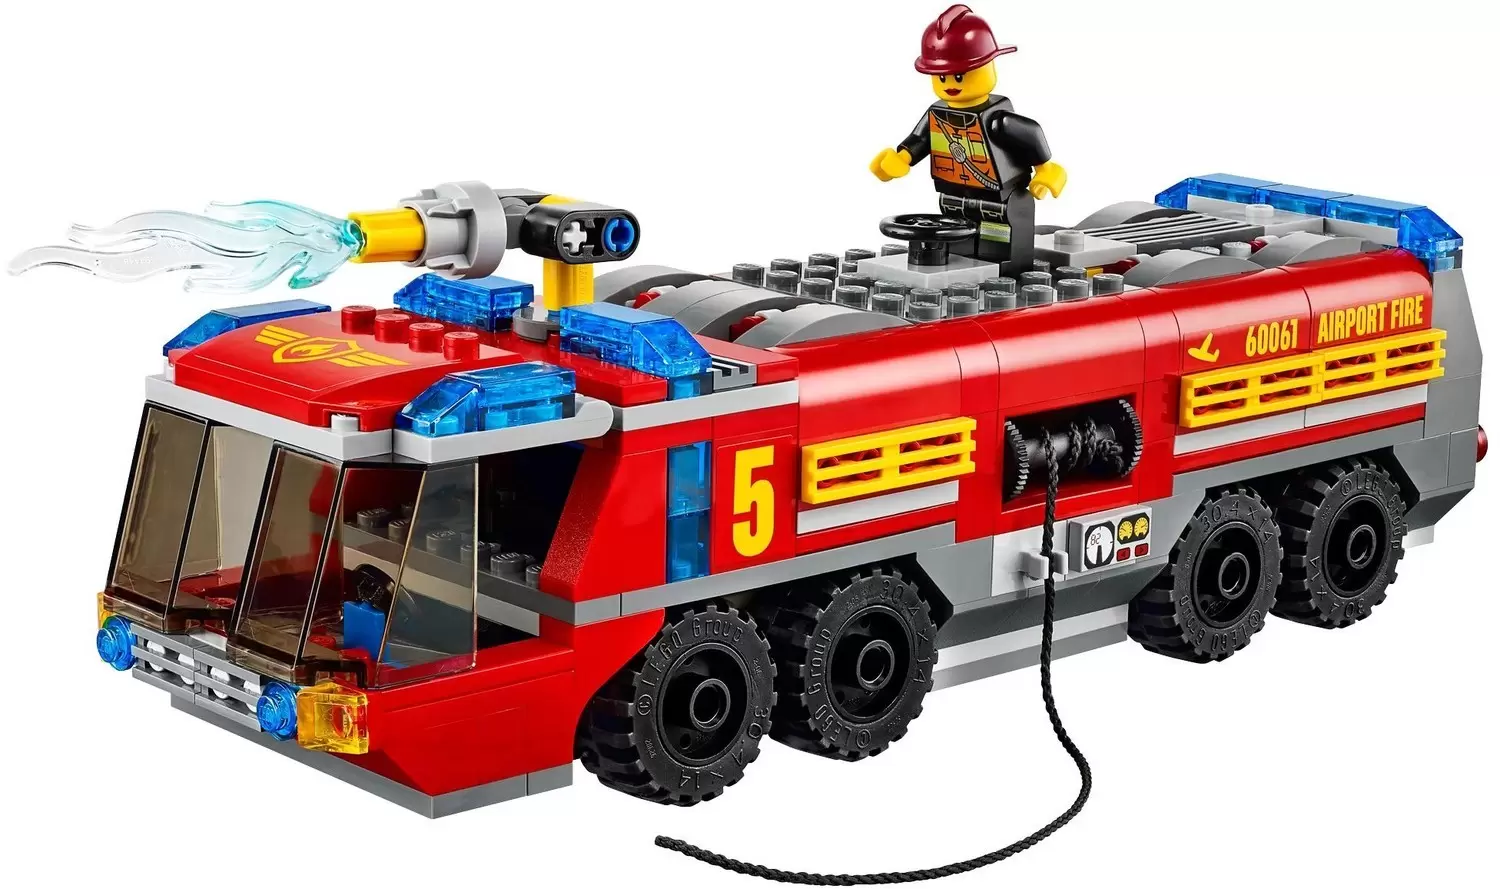 LEGO CITY - Airport Fire Truck